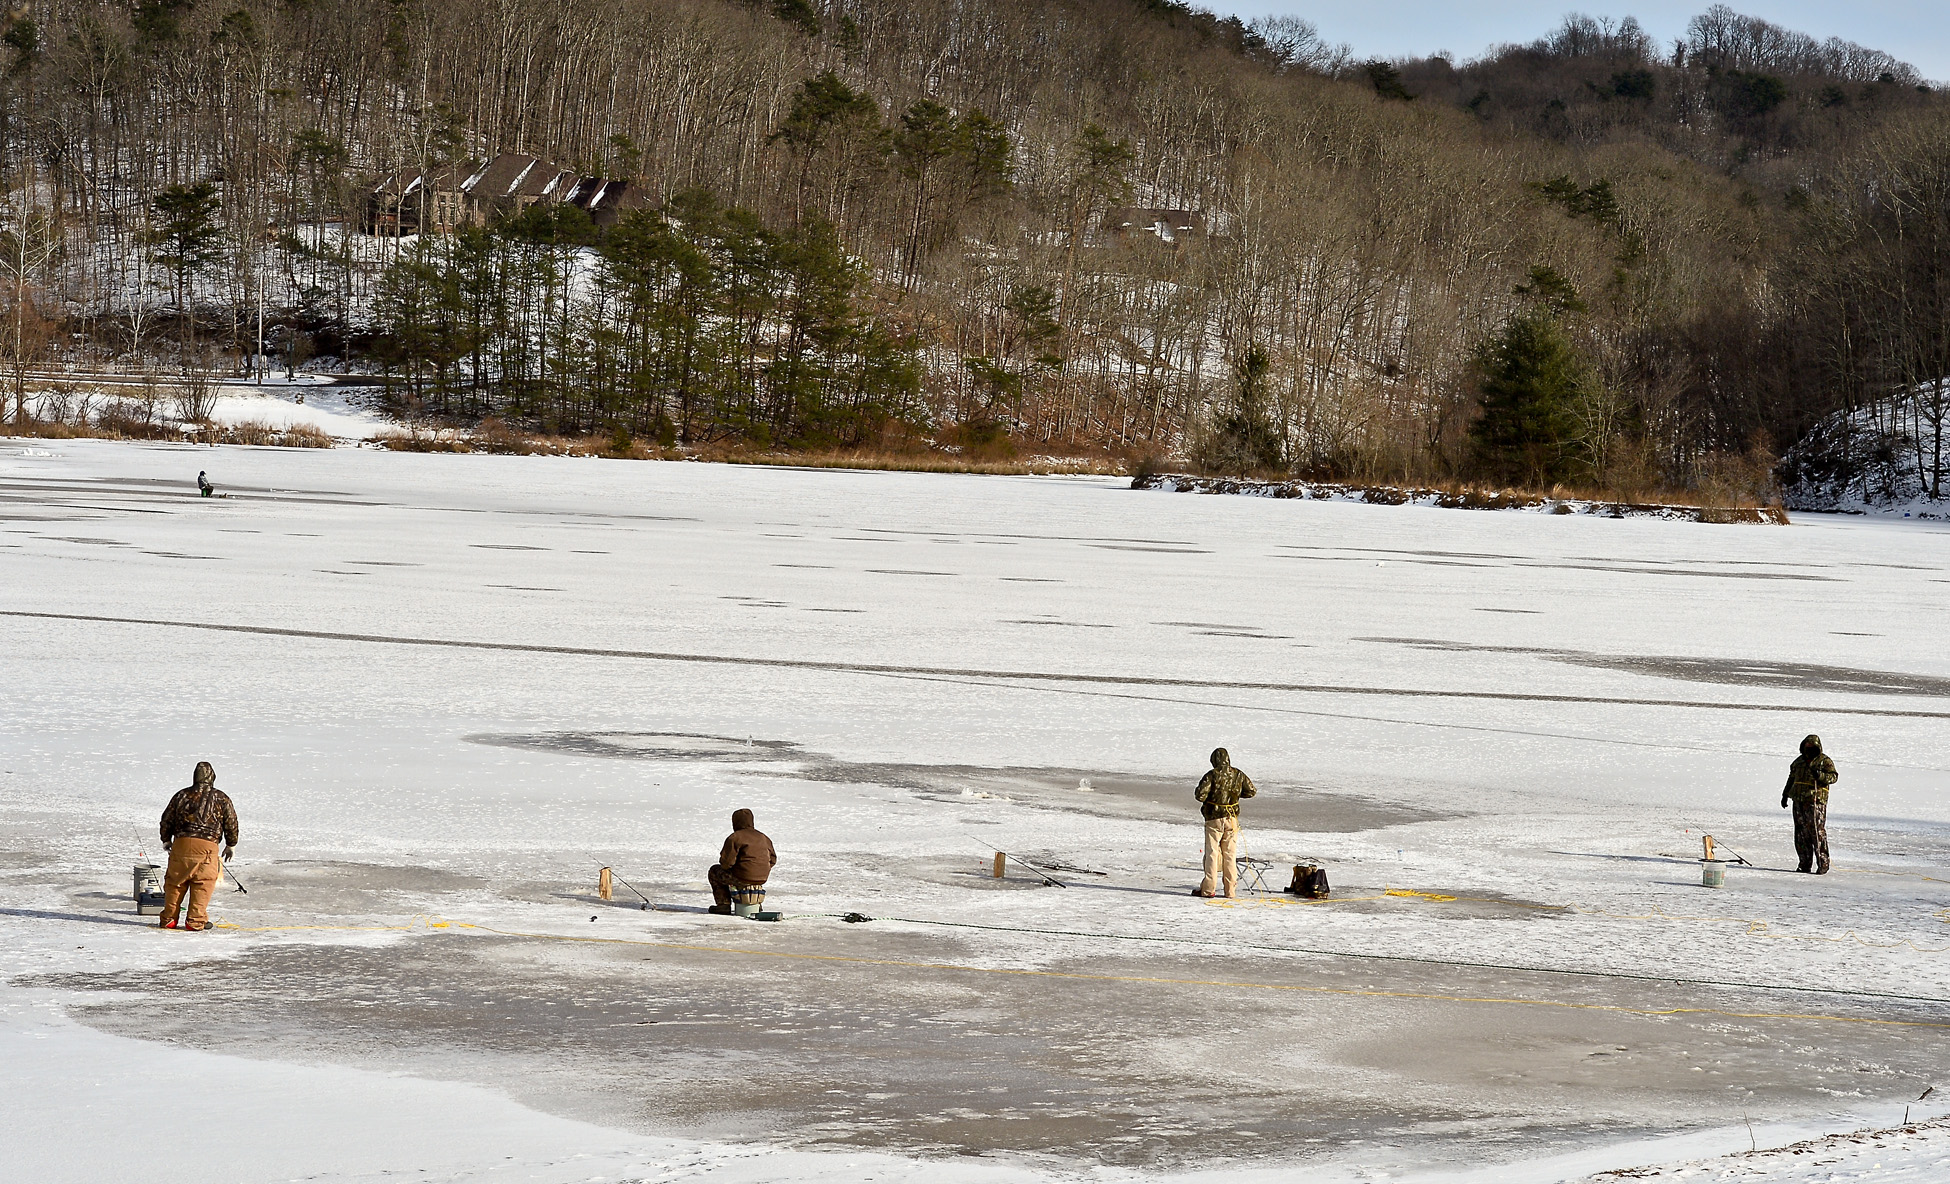 A group of ice fishers gather on the frozen surface of Ridenour Lake in Nitro, W.Va., Jan. 27, 2014.   